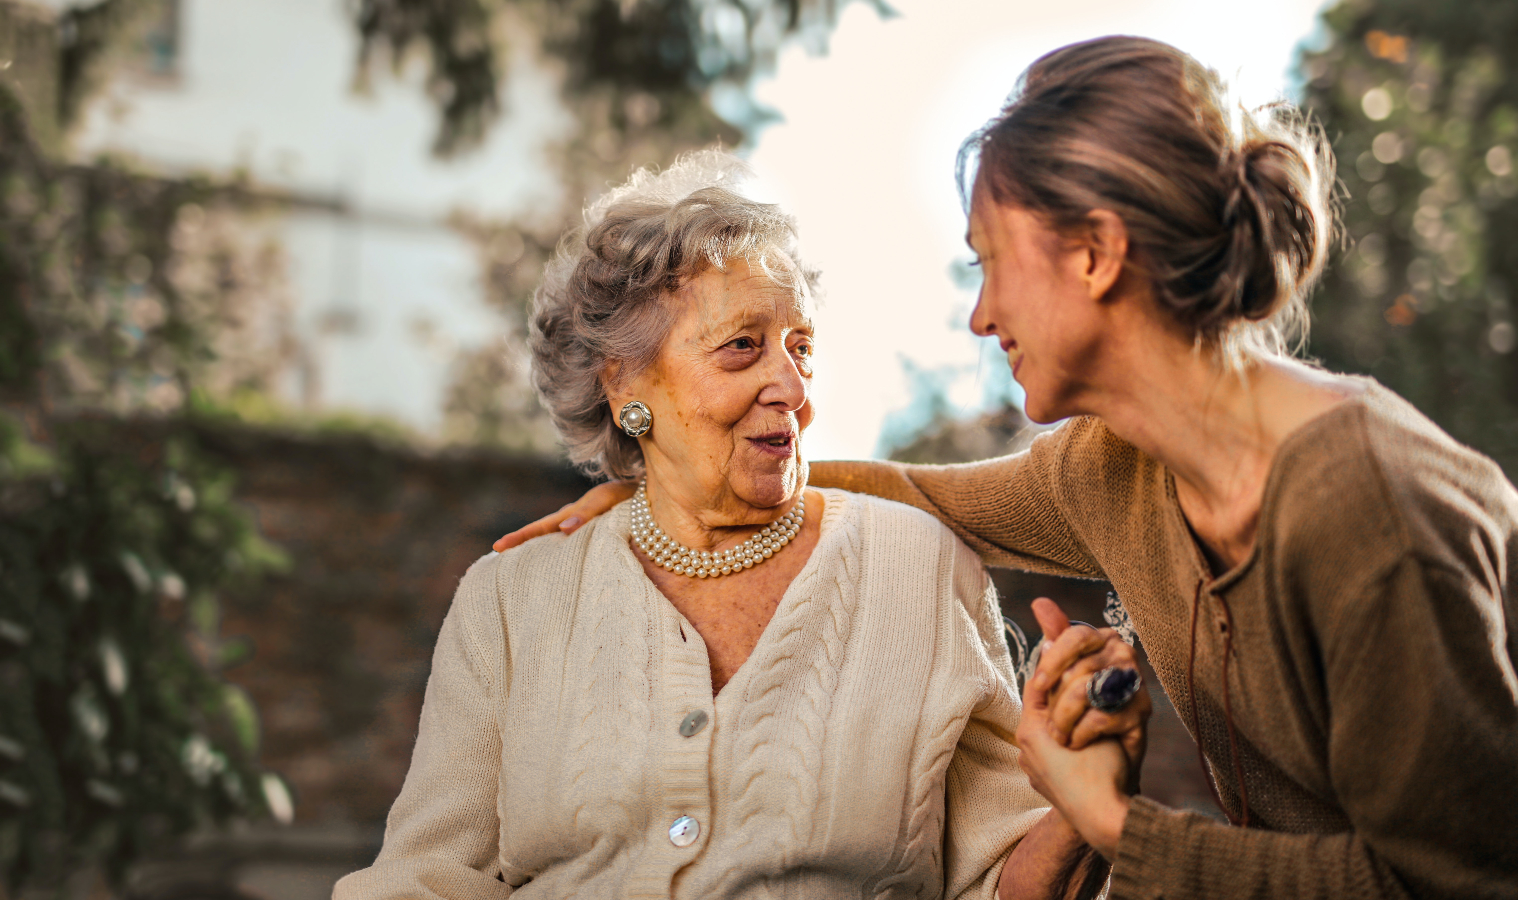 A woman chatting with an elderly woman